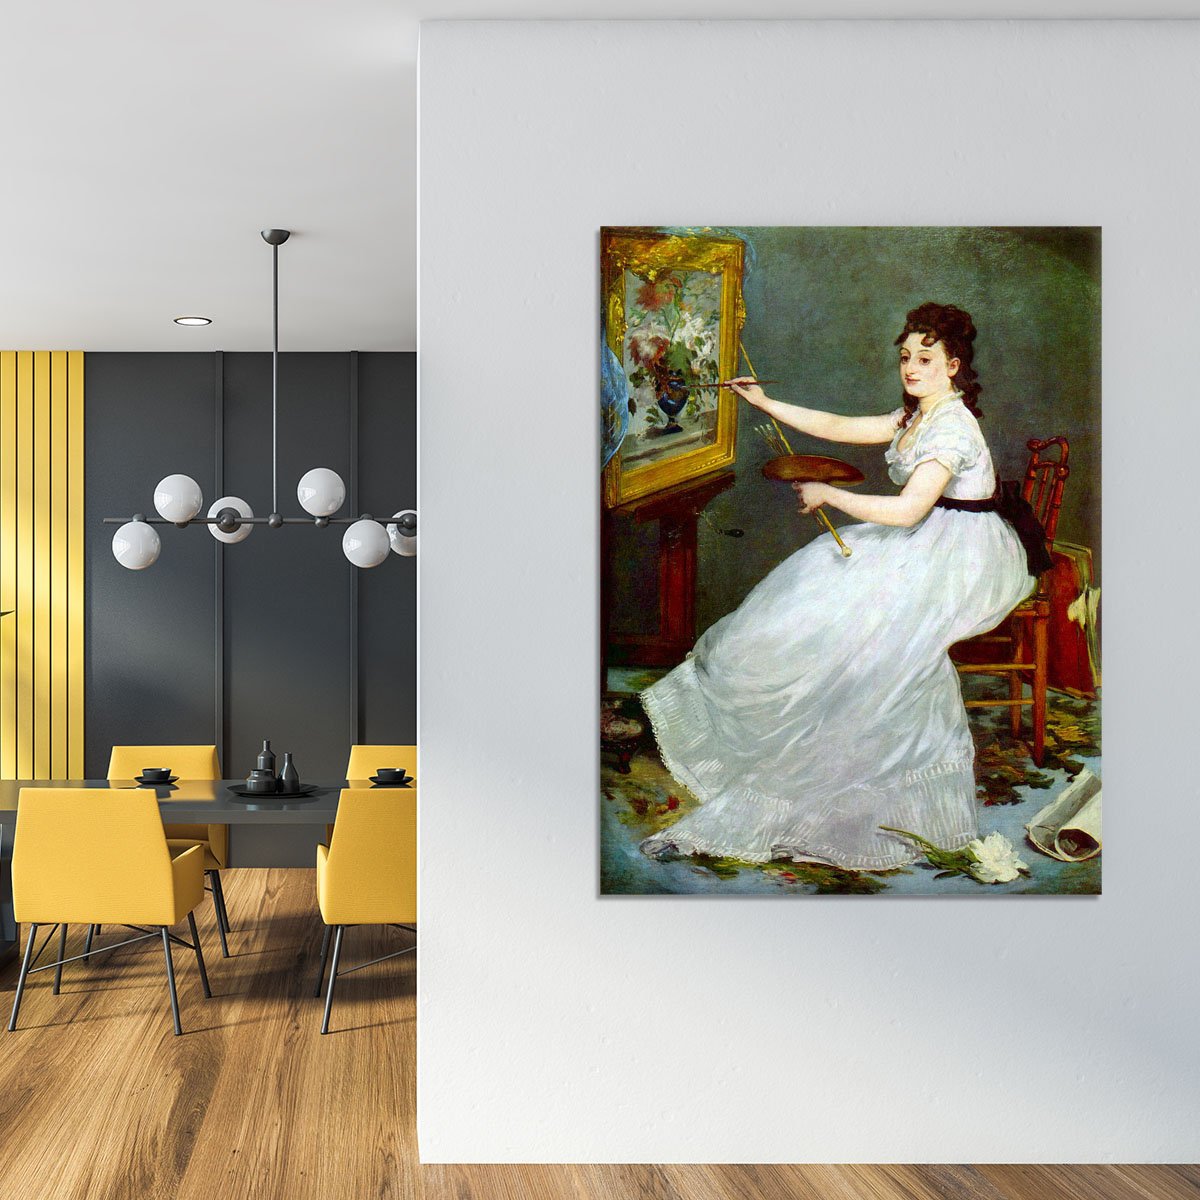 Portrait of Eva GonzalCs in Manets studio by Manet Canvas Print or Poster